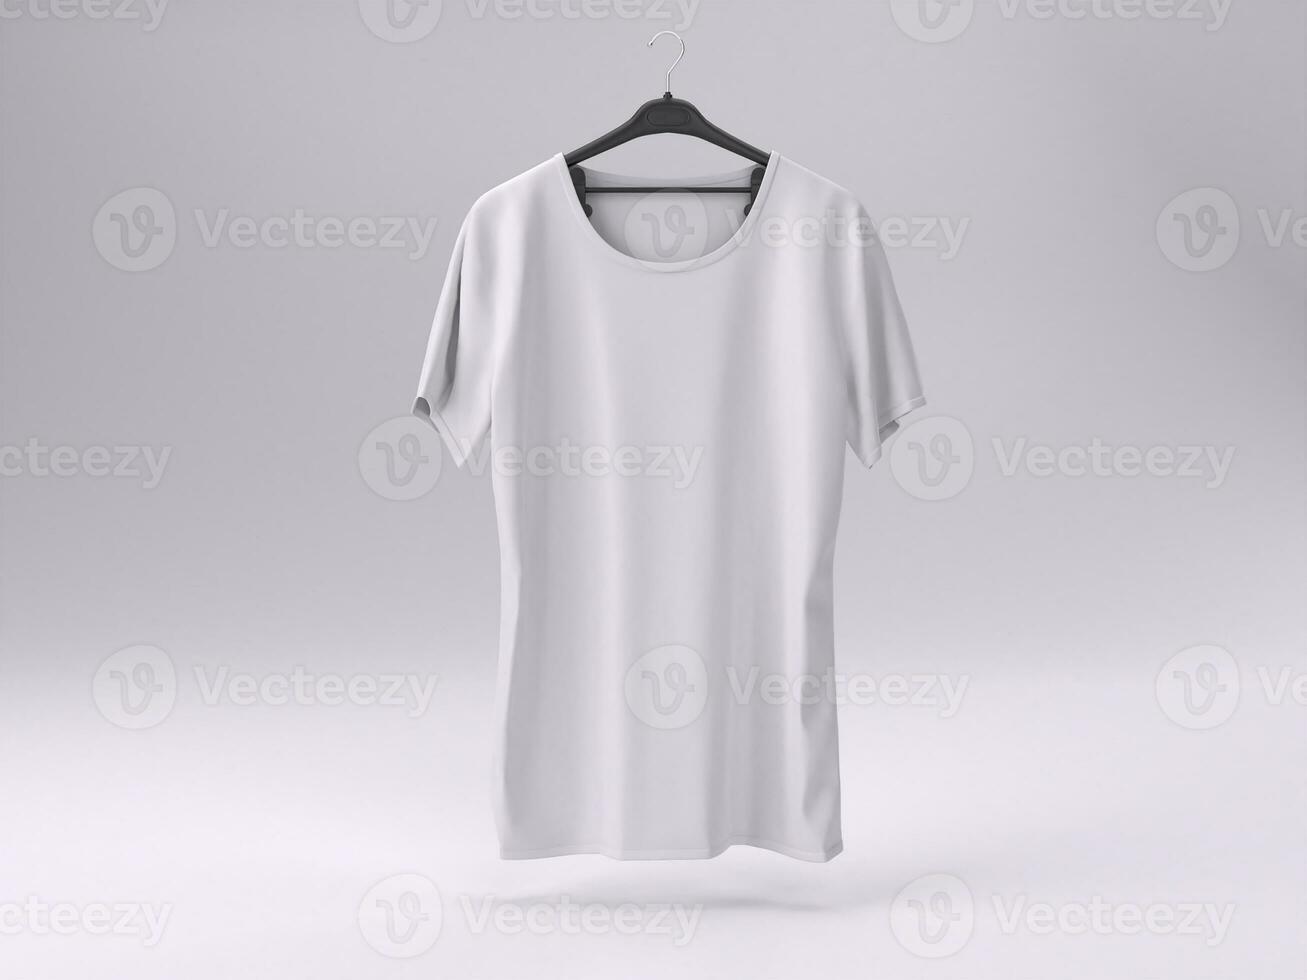 3D render empty white t-shirt mockup template photo with white background front view